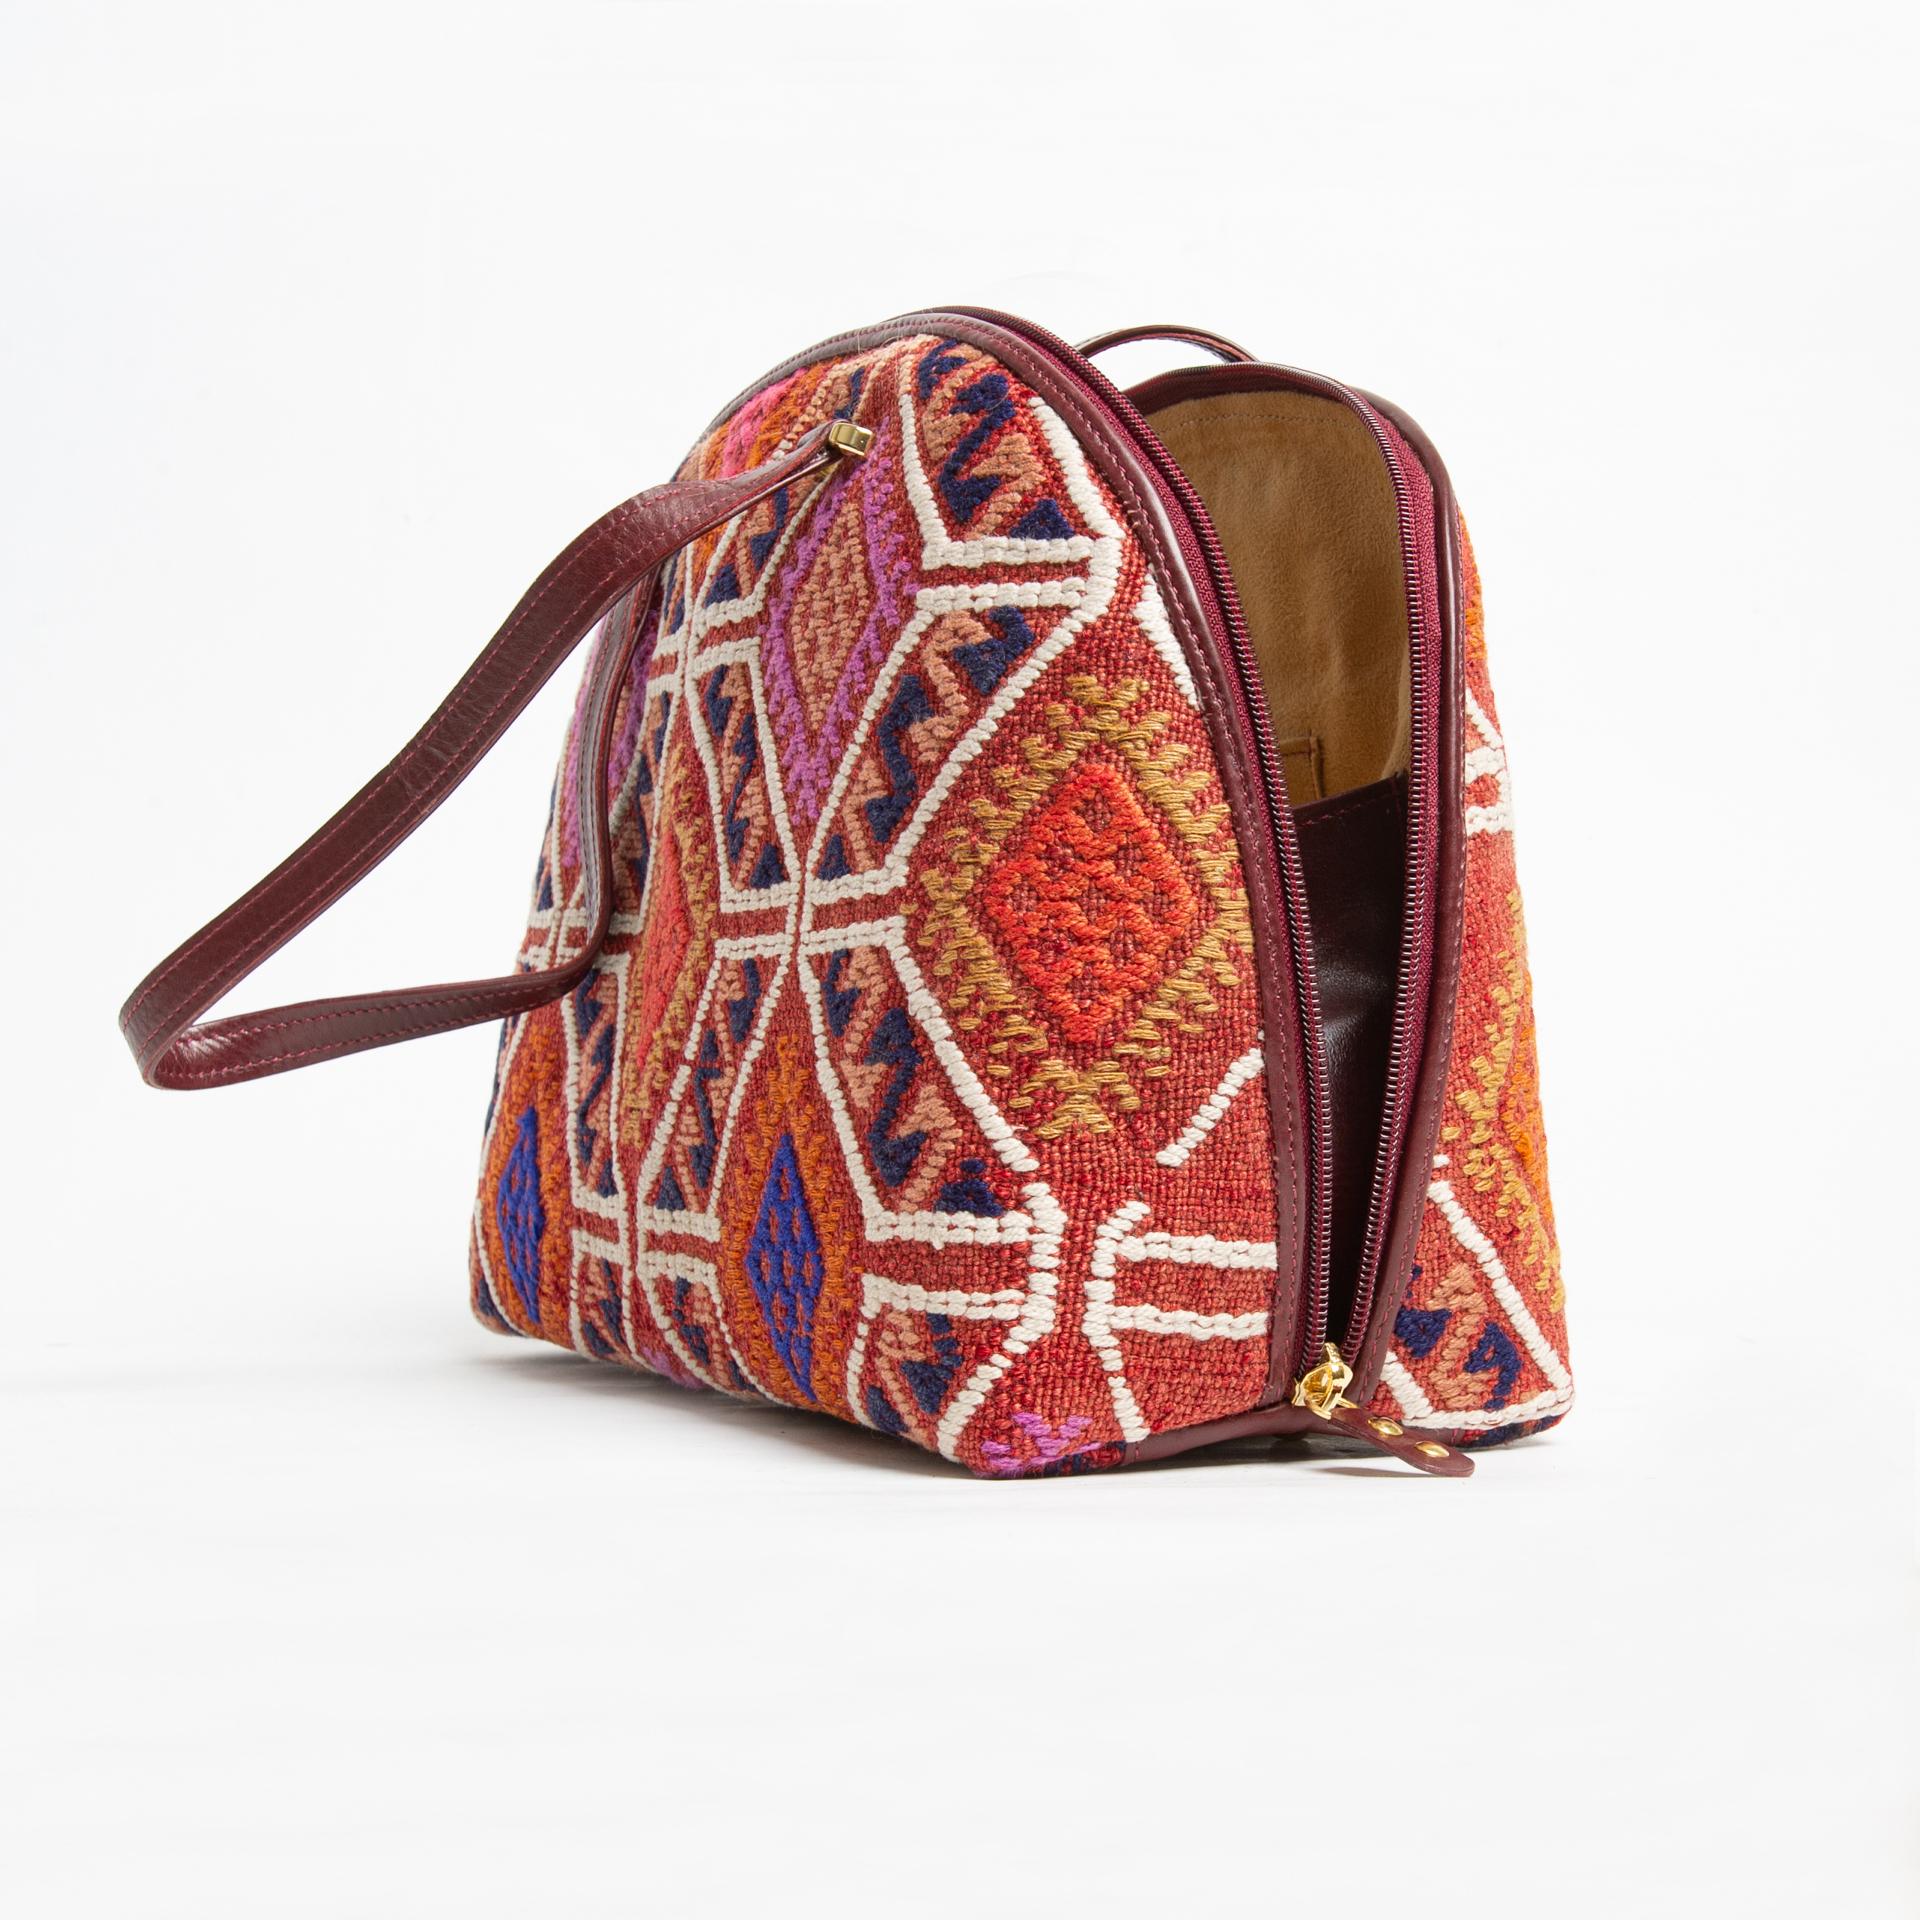 Italian Bag with Kilim and Leather For Sale 2